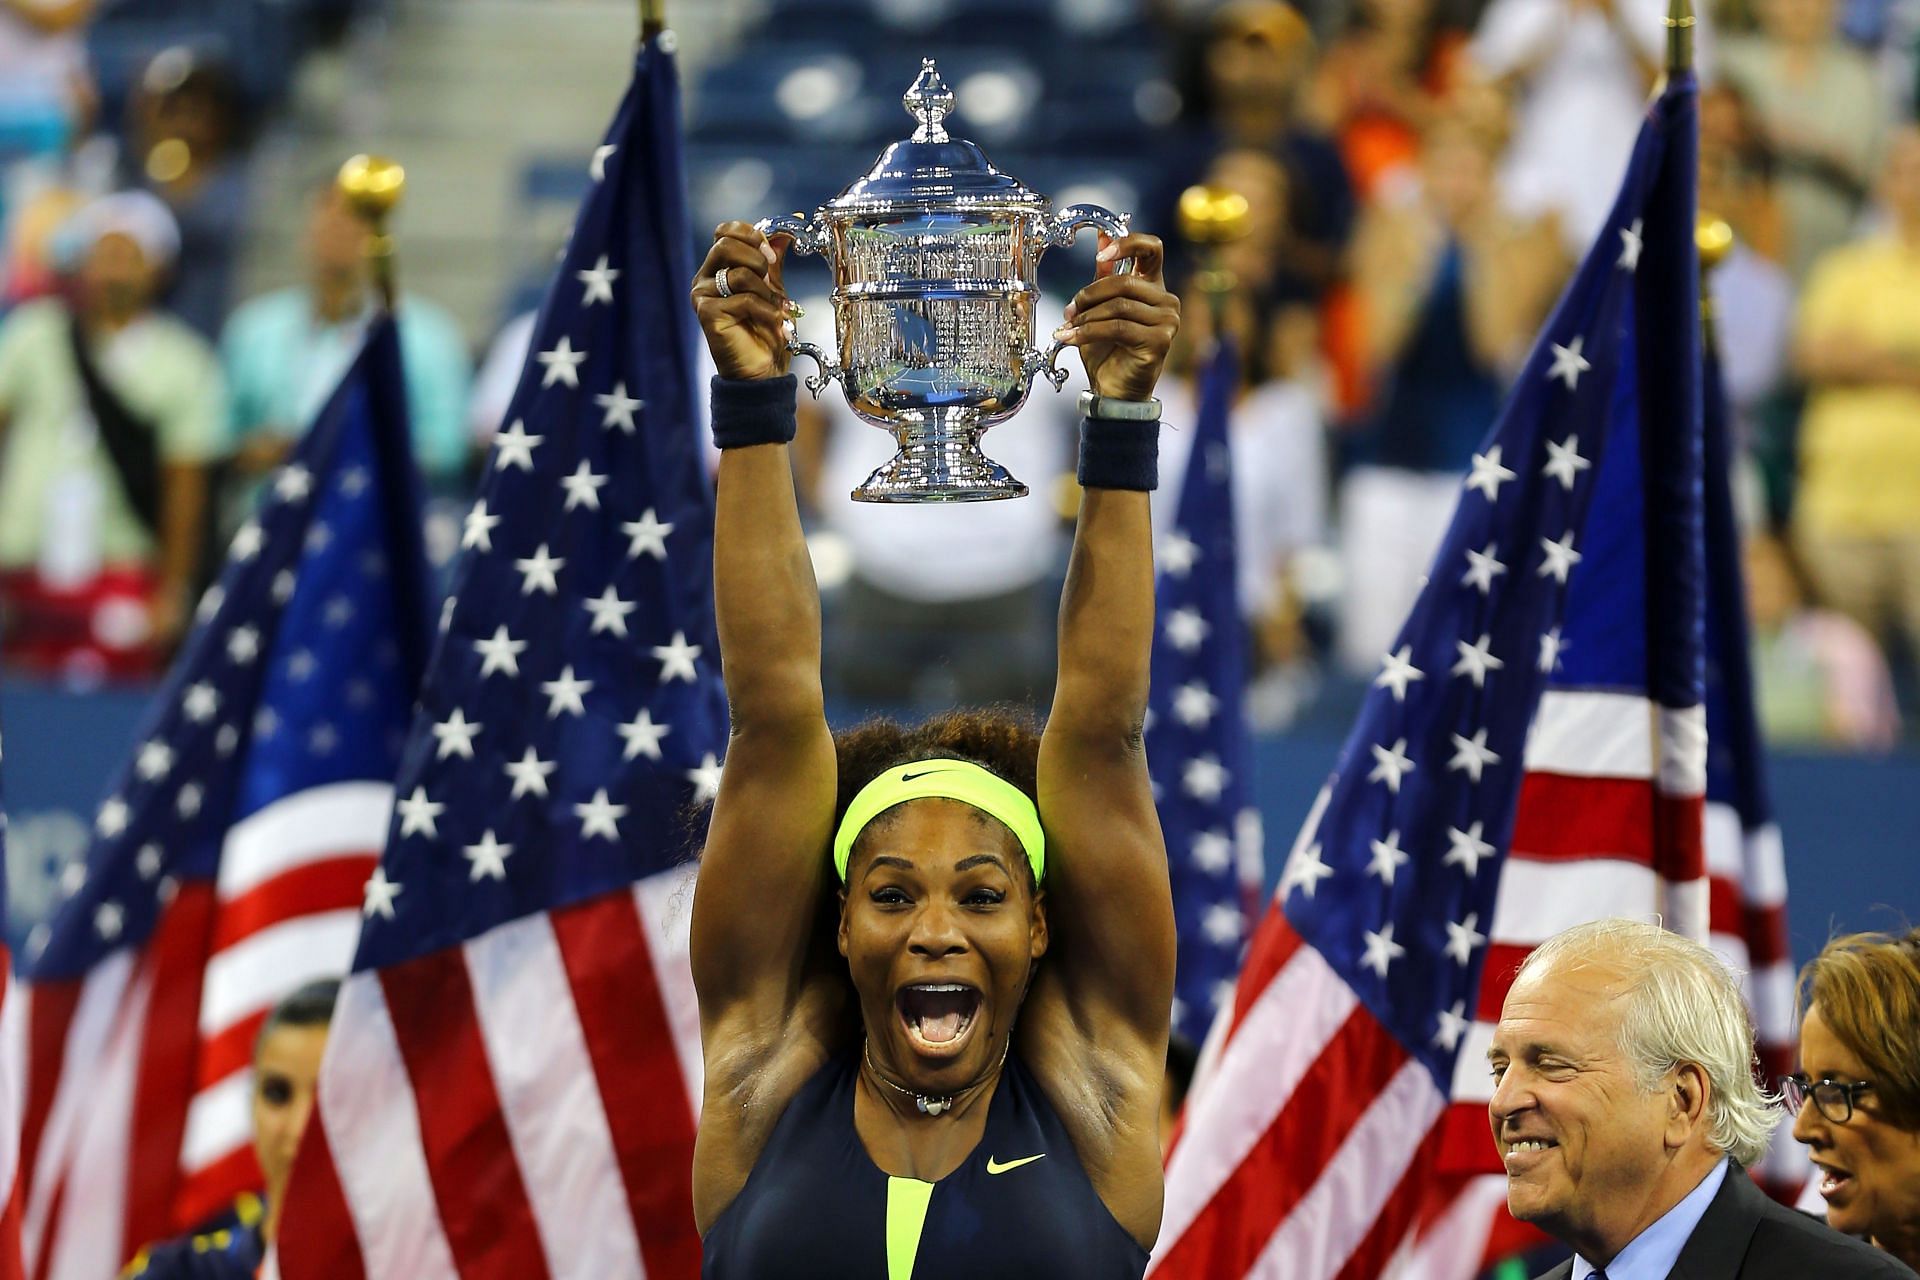 Williams won her fourth US Open title ten years ago